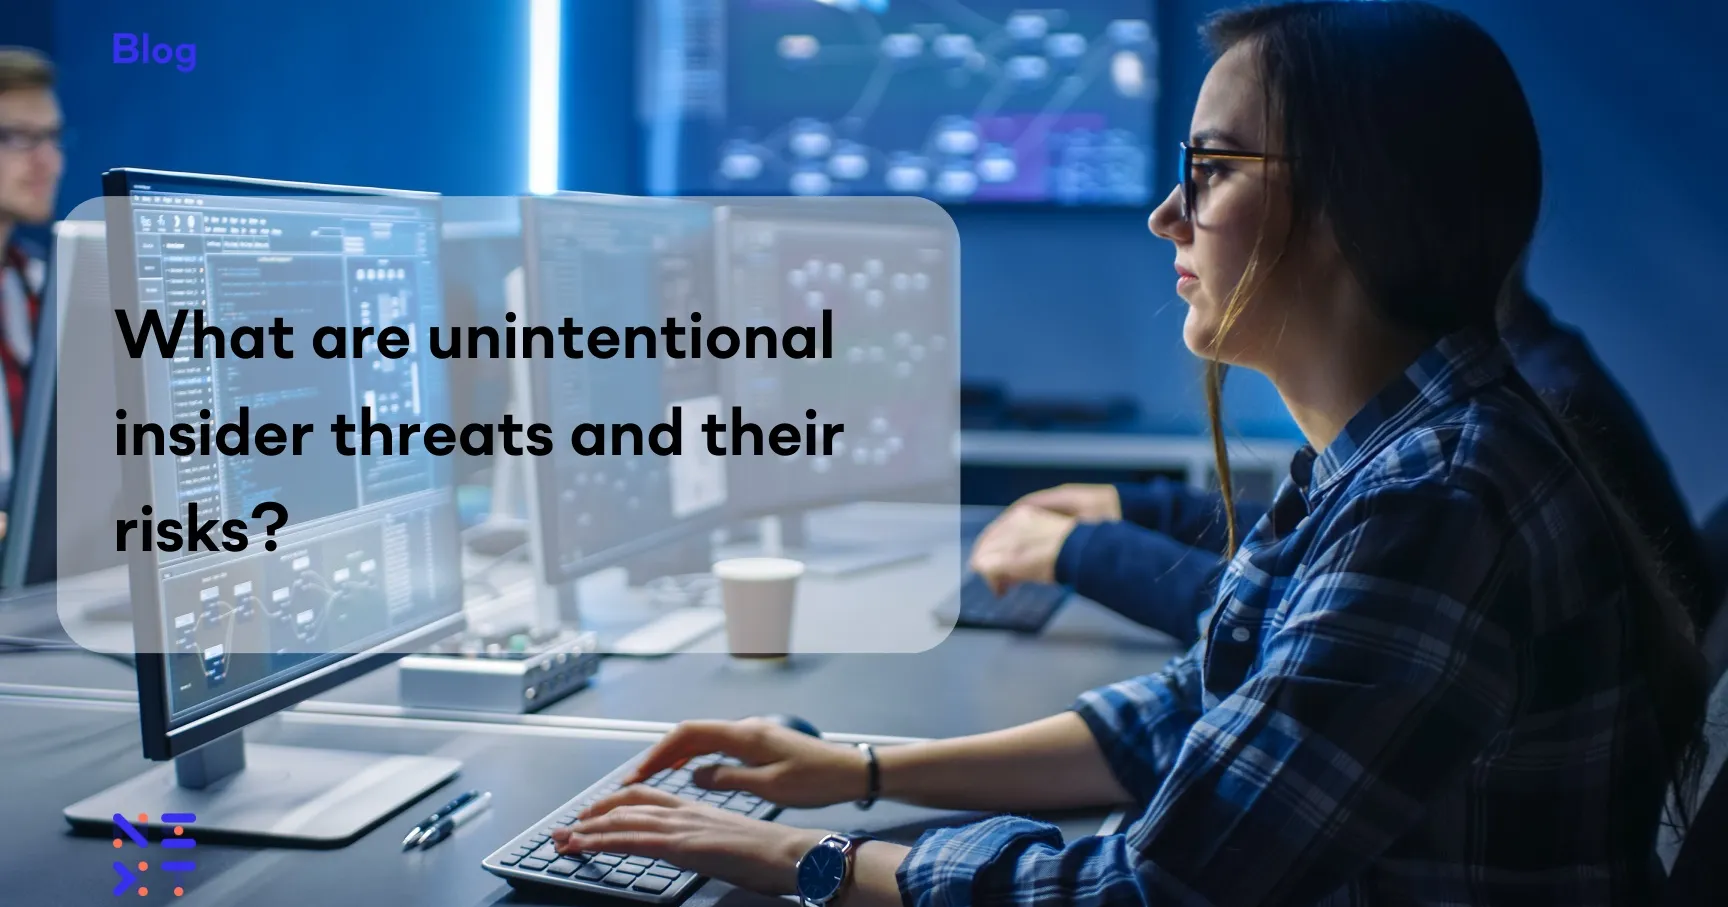 What are unintentional insider threats and their risks?